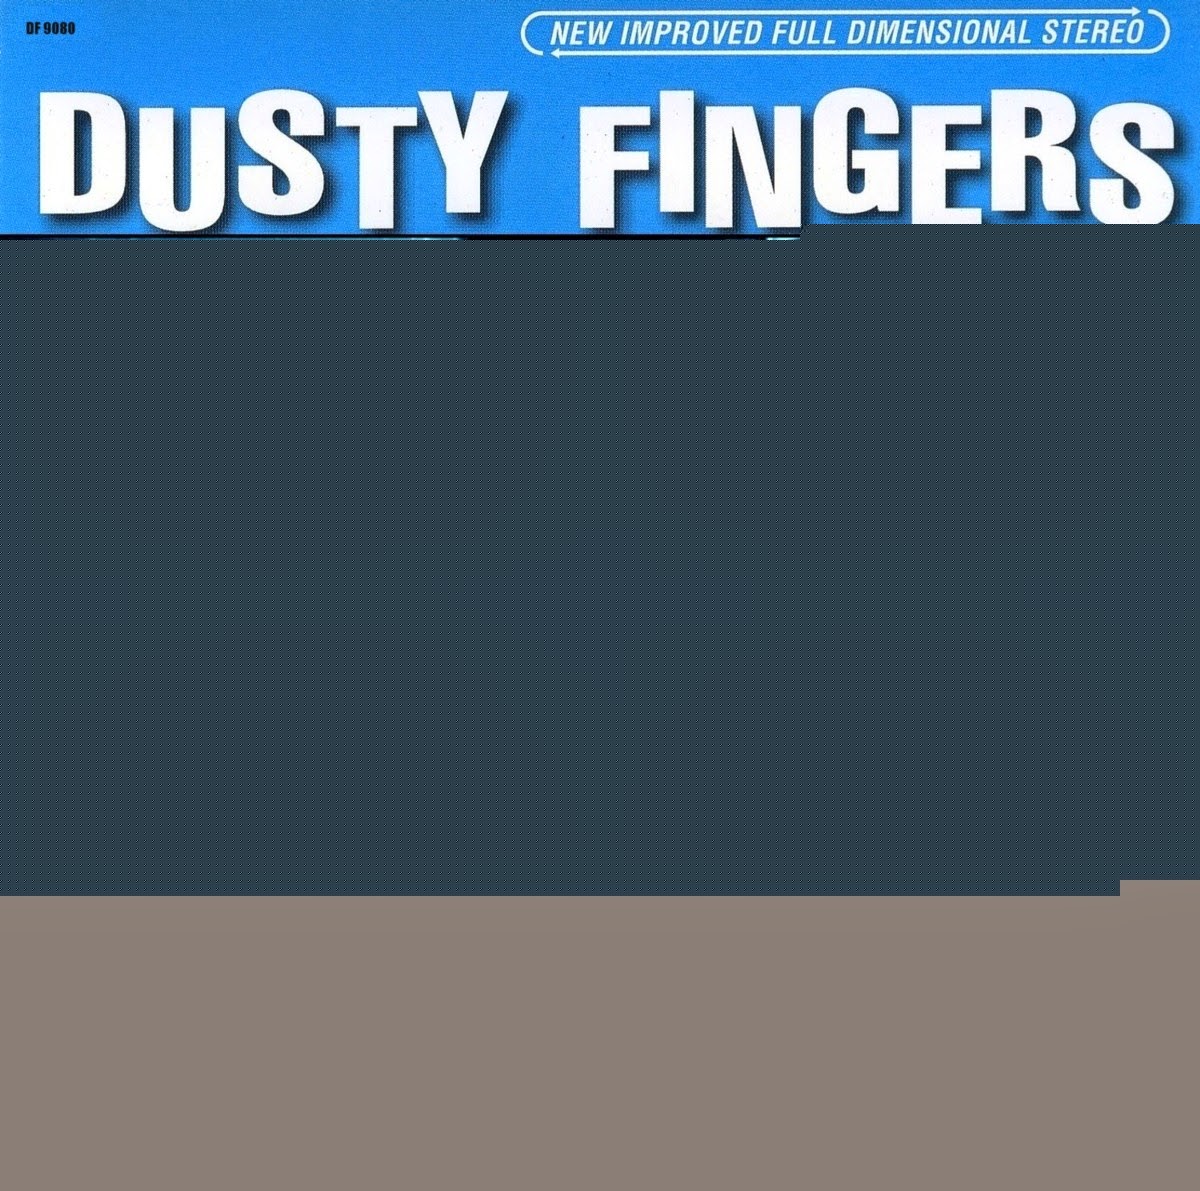 Download VA - Dusty Fingers - The Complete Collection (1997-2008) 16